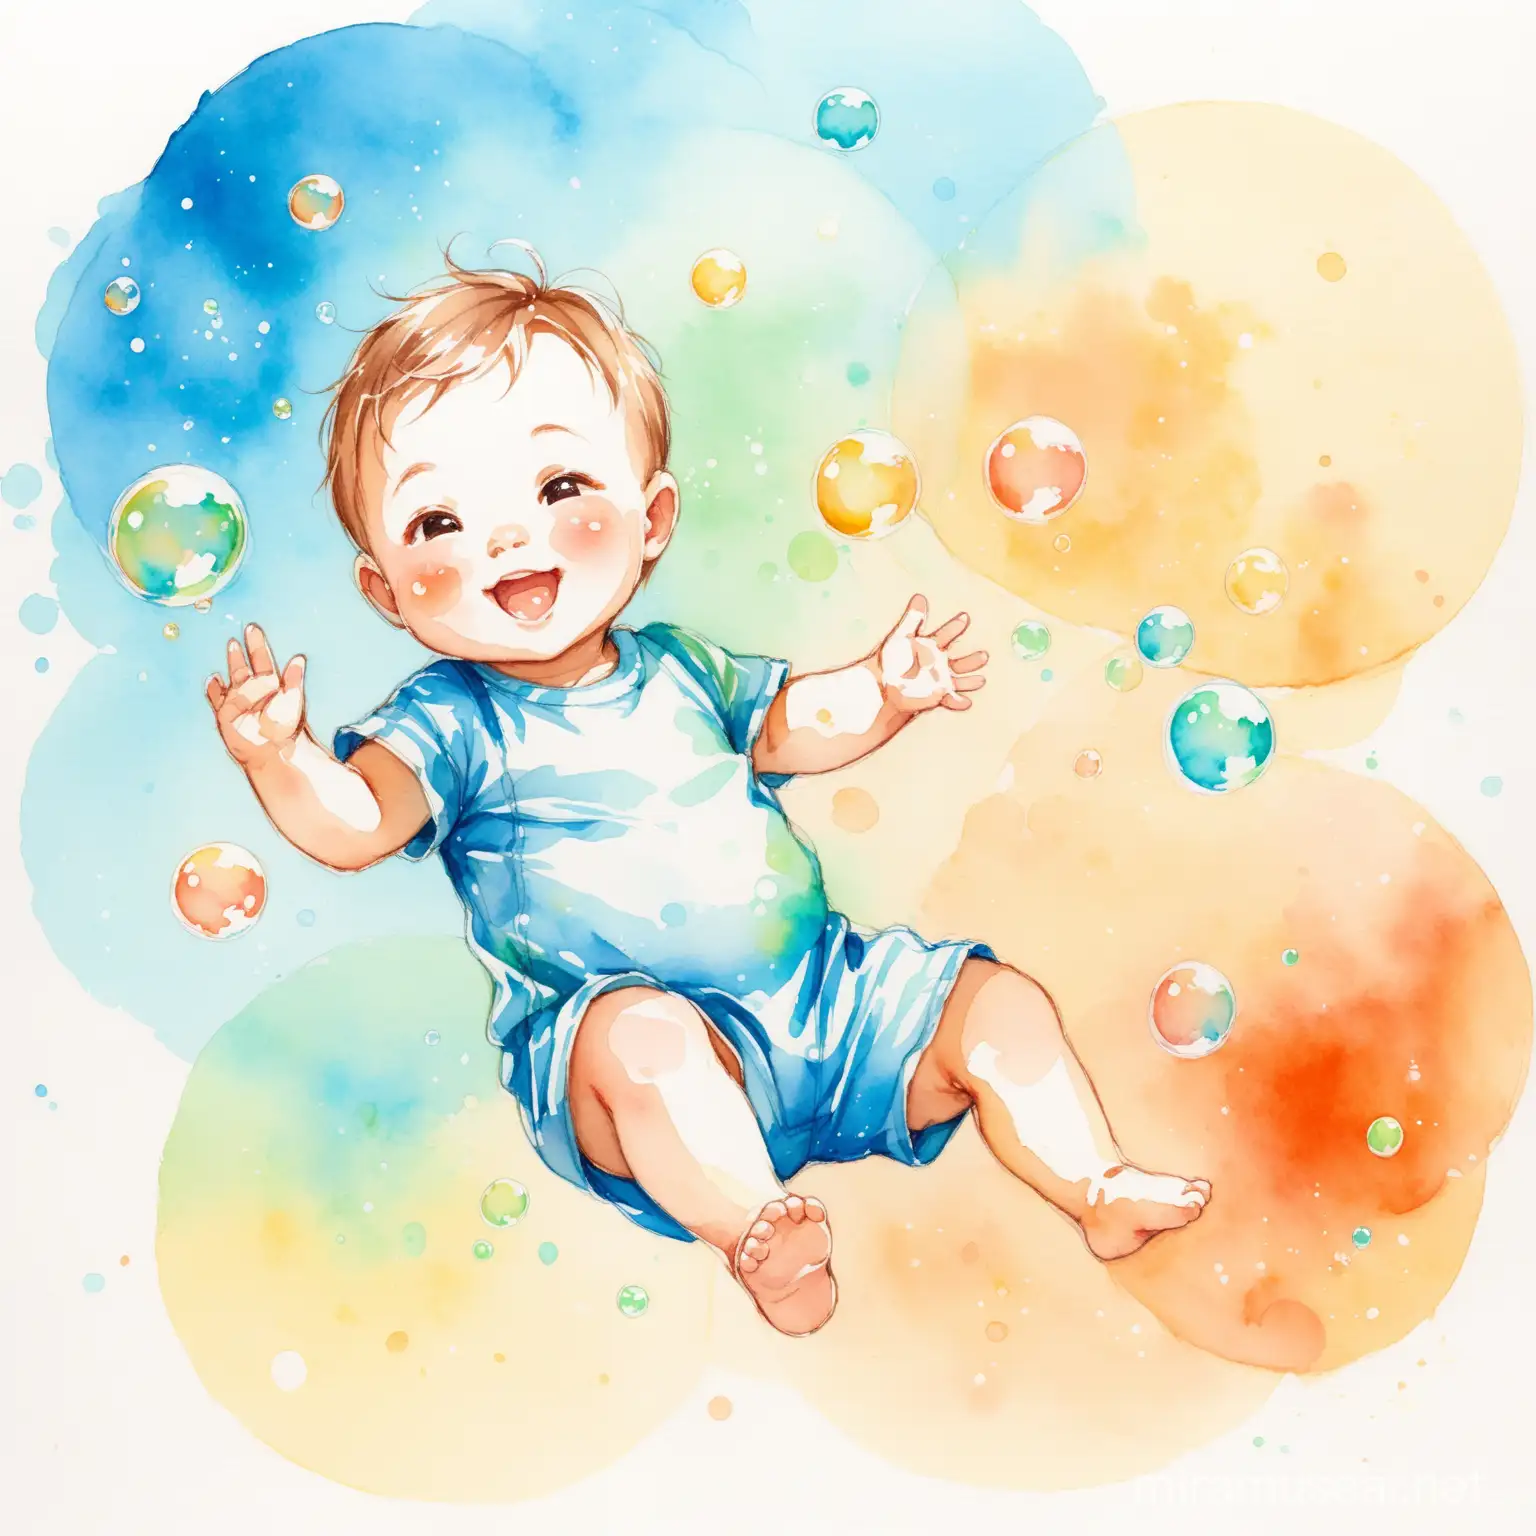 Joyful Toddler Playing with Bubbles Watercolor Sketch of a 4YearOld Boy